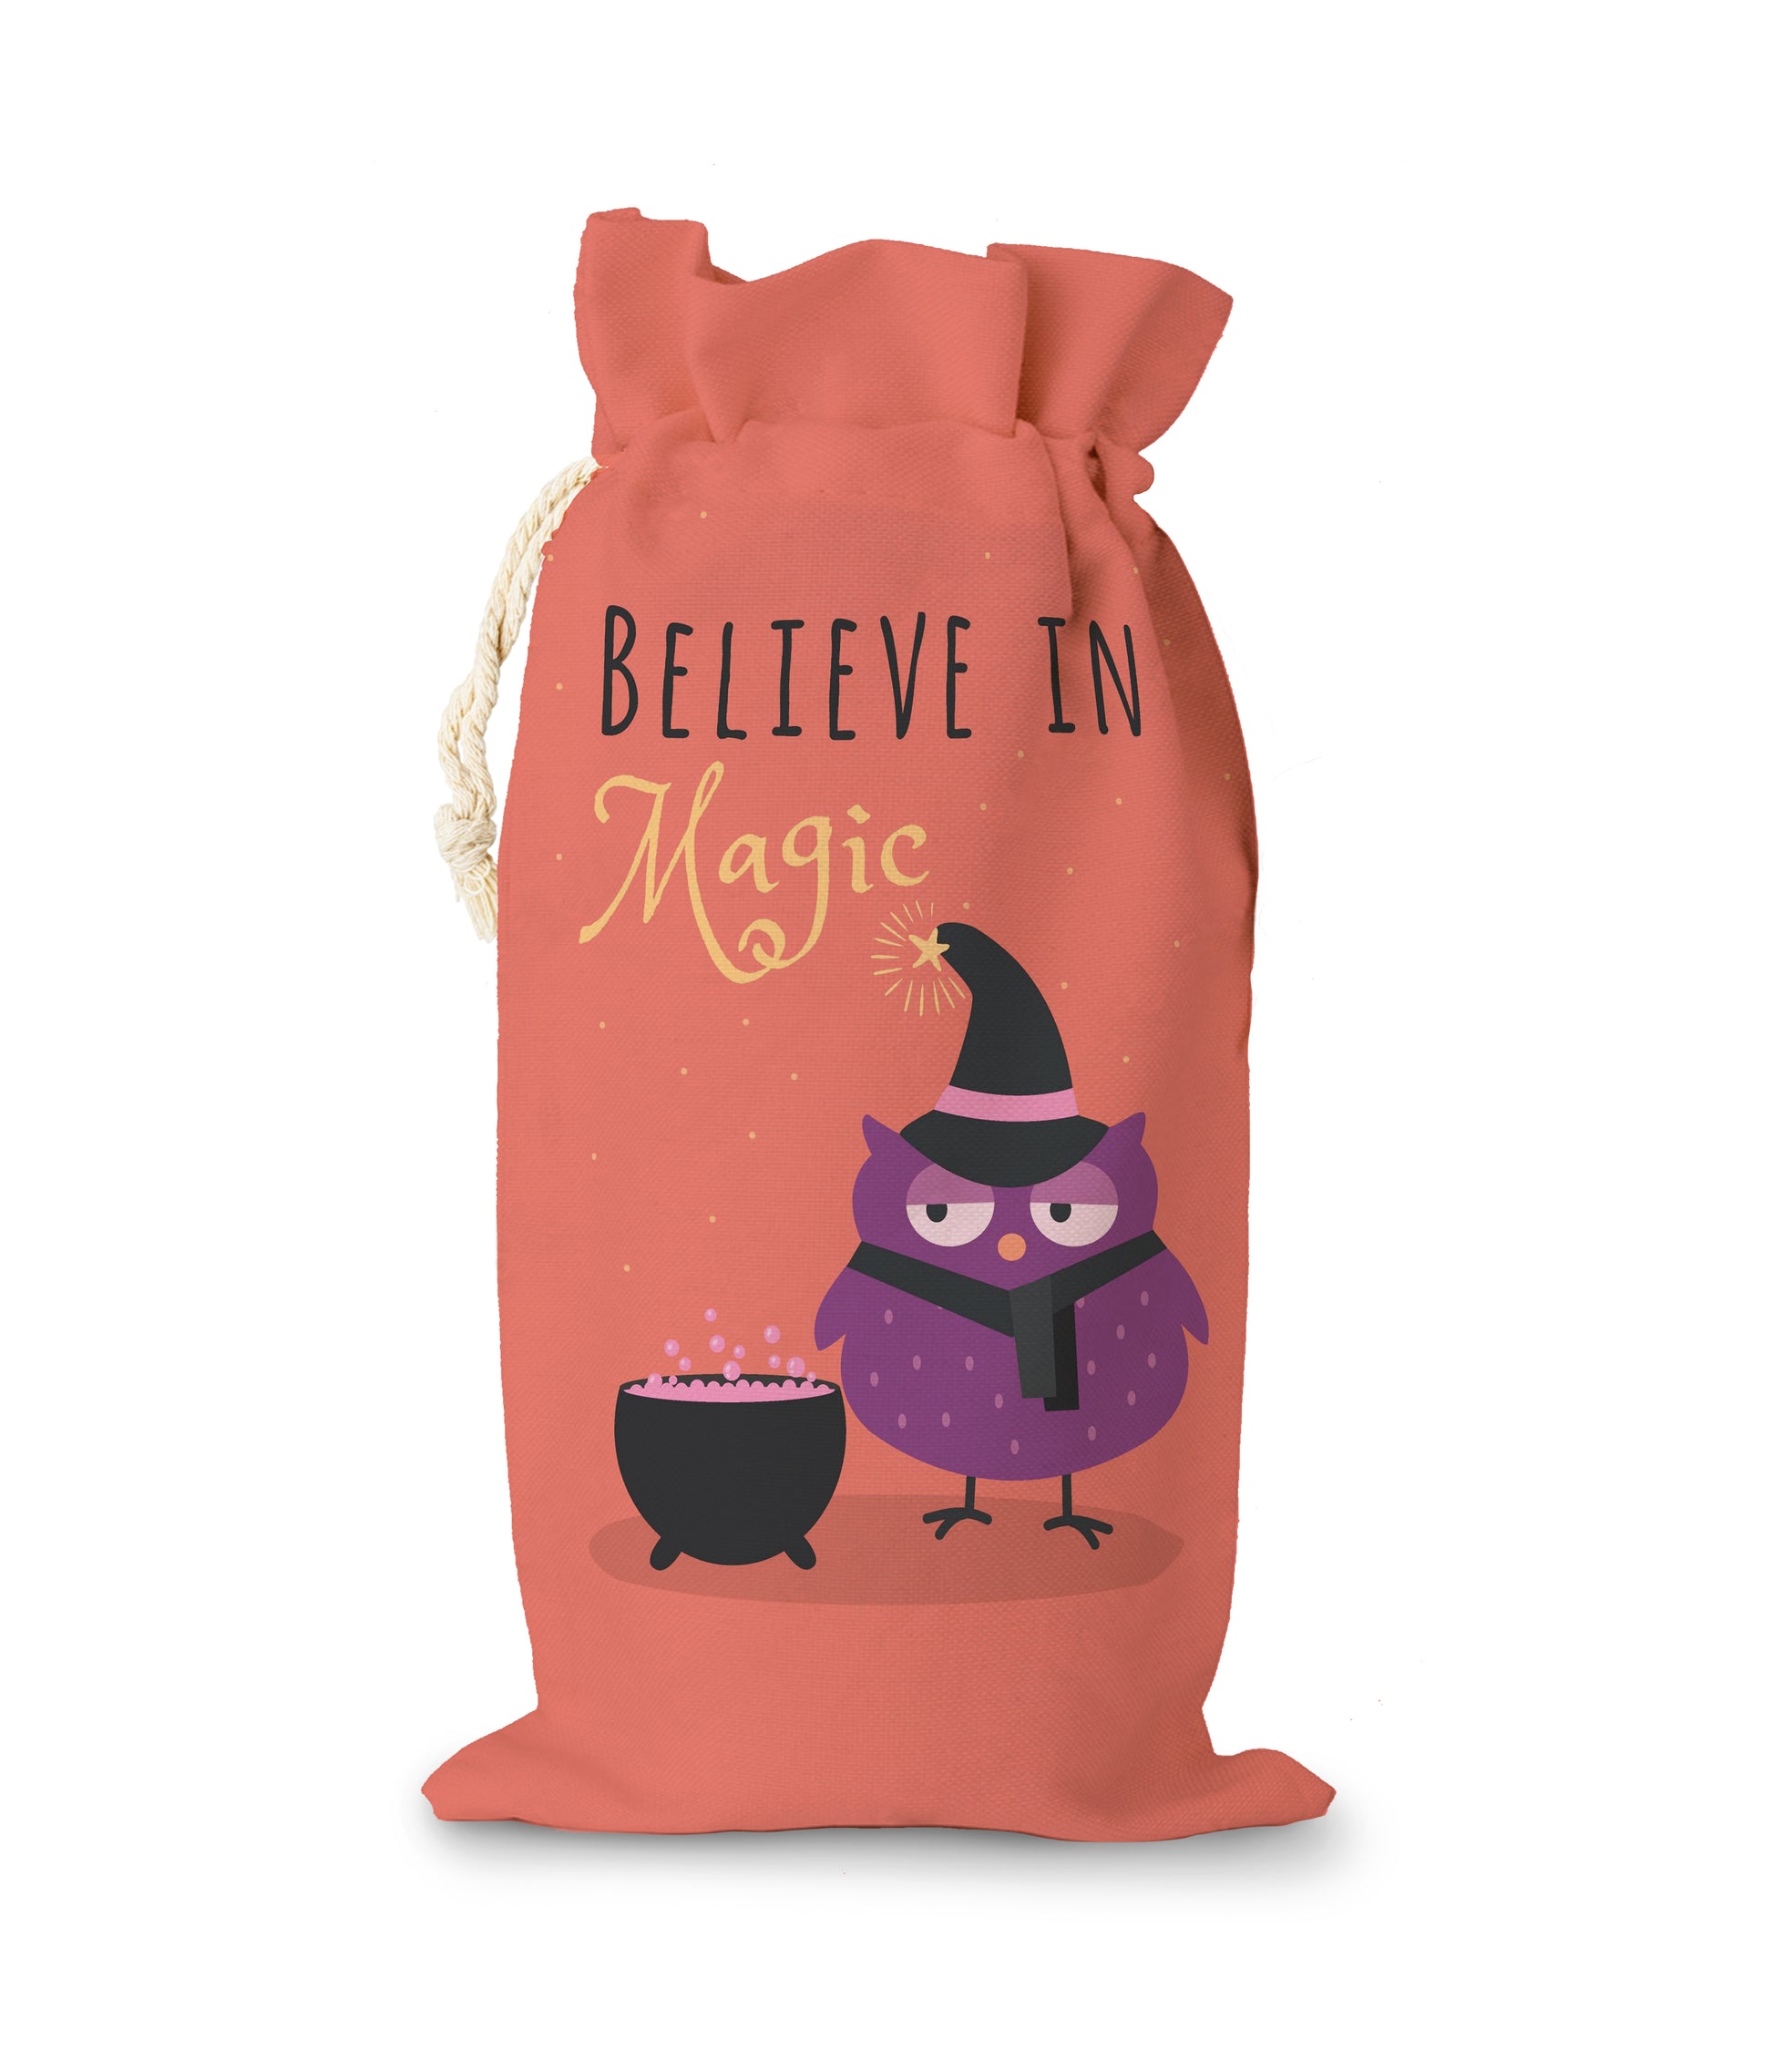 Owl Believe In Magic Halloween Sack with Text "Belive in Magic"